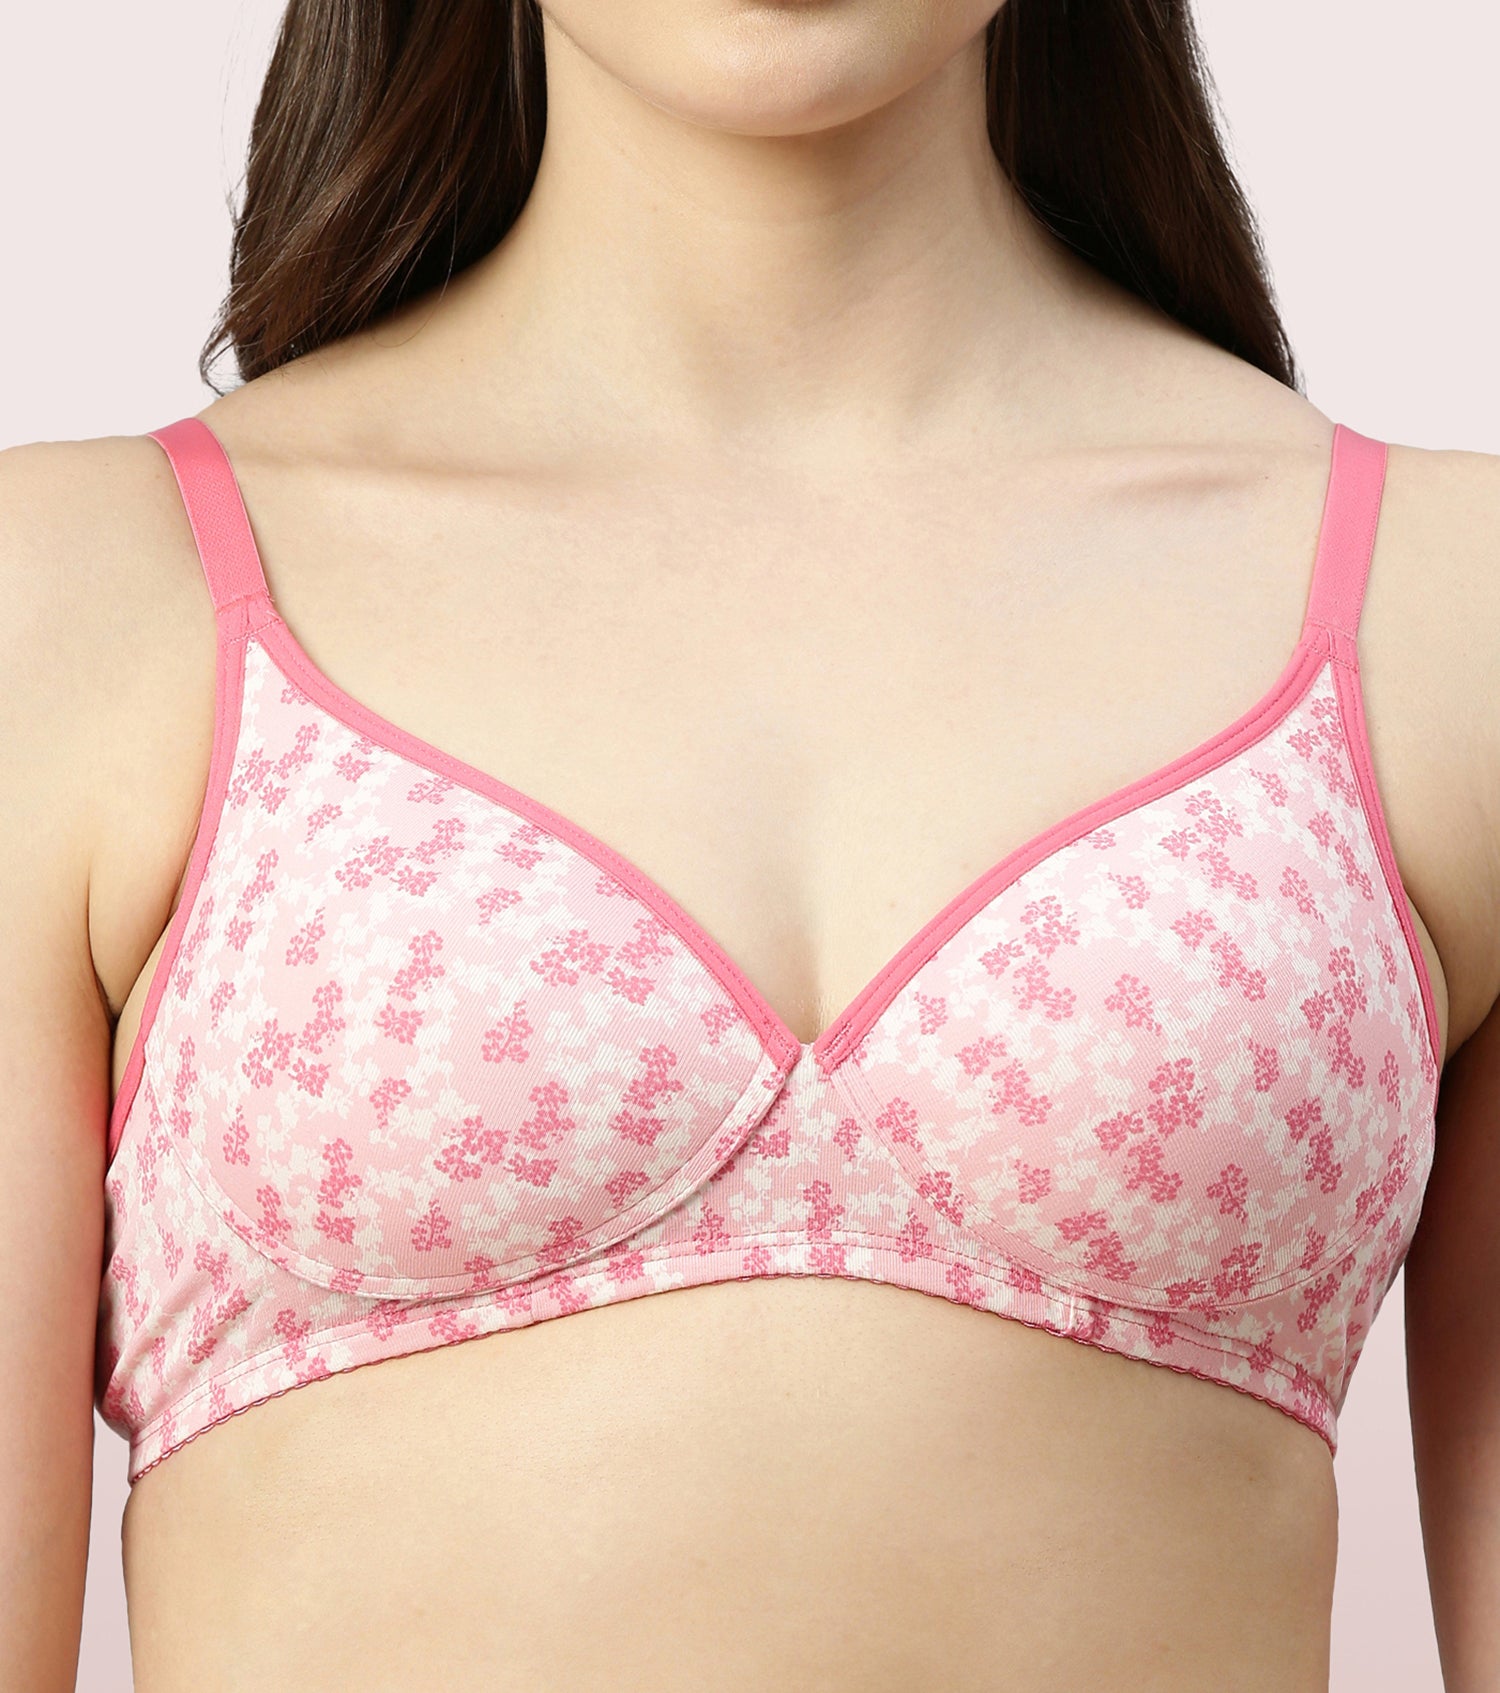 Enamor Perfect Coverage Supima Cotton T-Shirt Bra For Everyday Comfort - Padded, Non-Wired Bra & Medium Coverage Bra | A039 | Trailing Flora